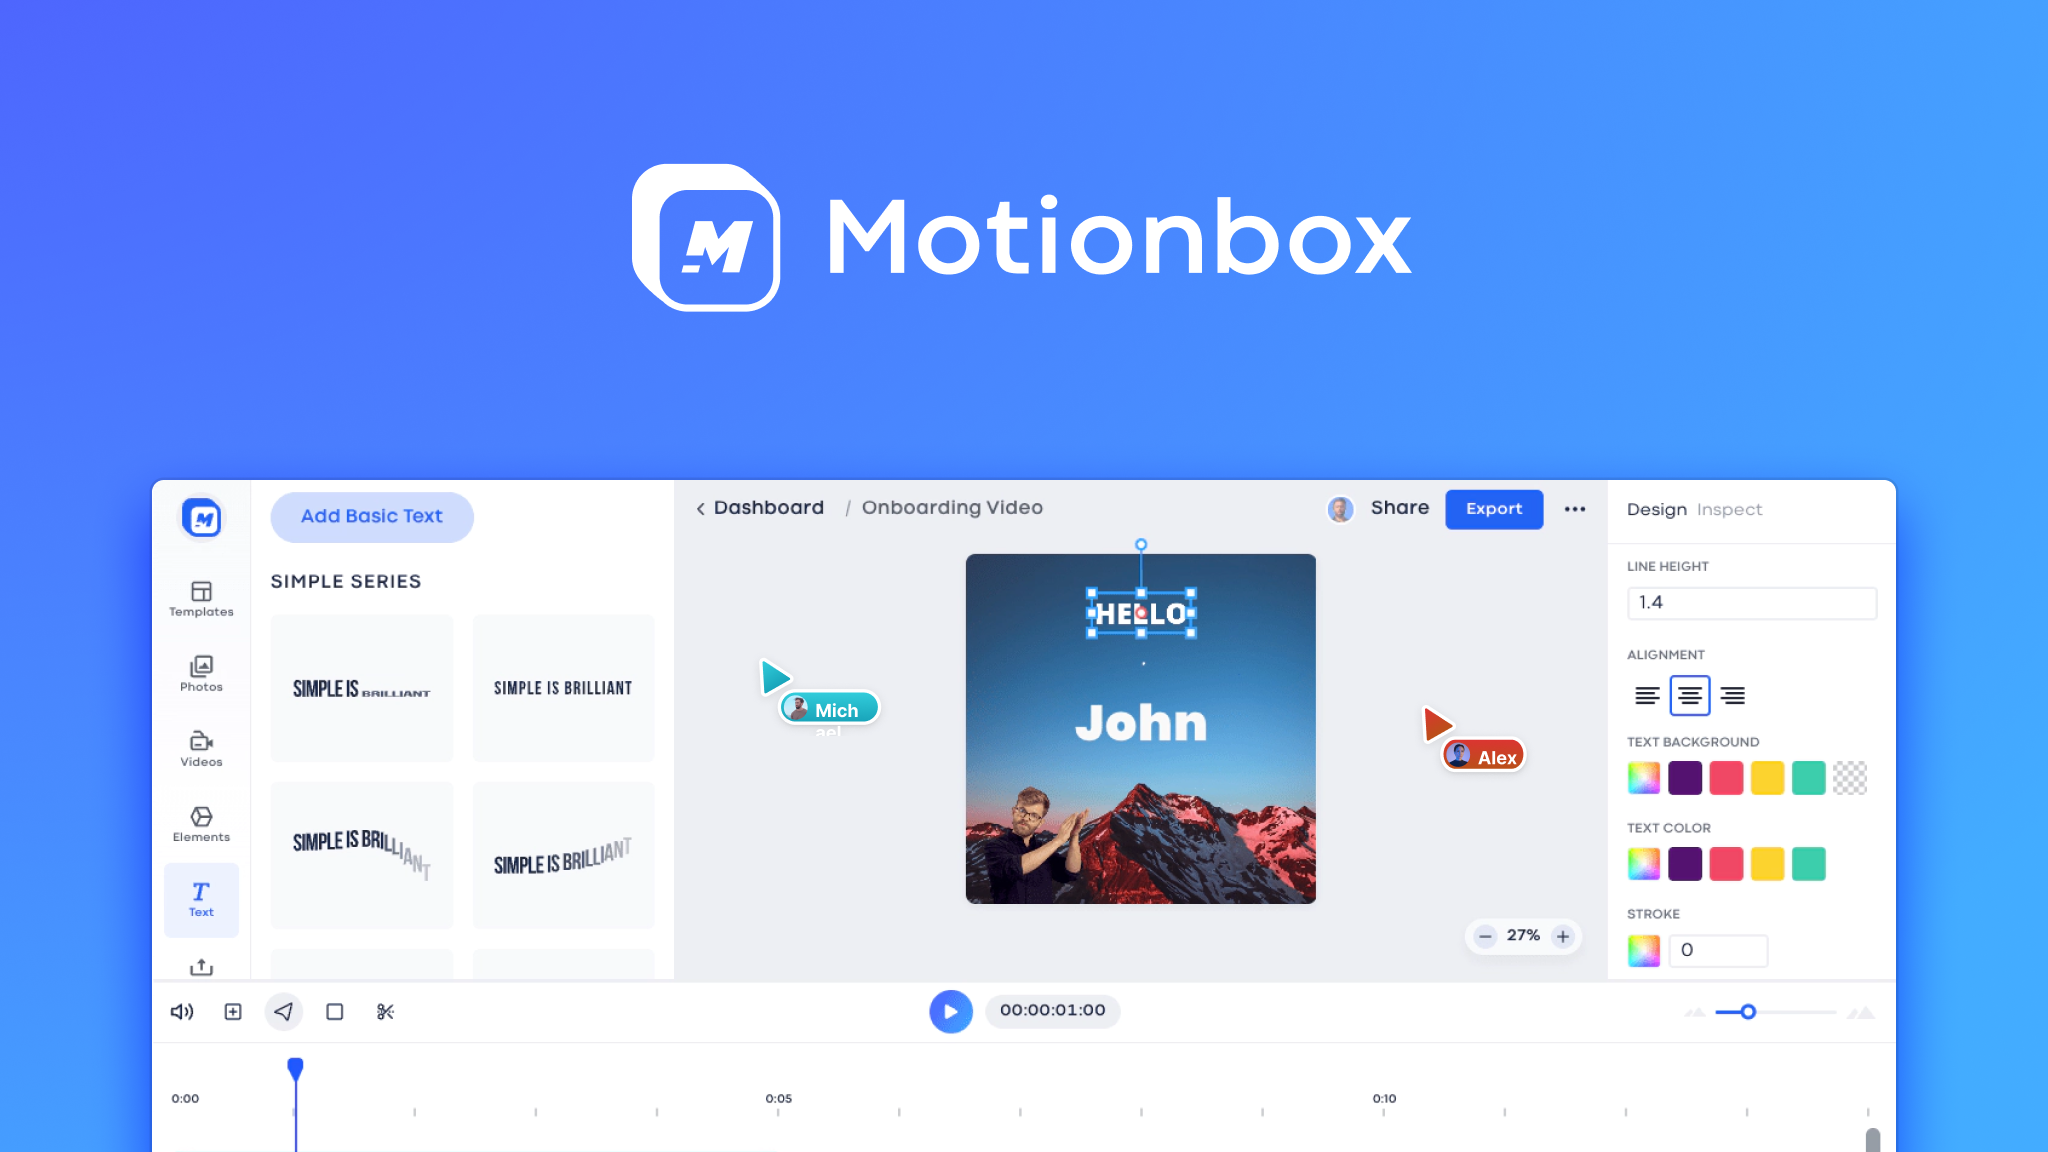 Motionbox made their product multiplayer without making tradeoffs on data governance